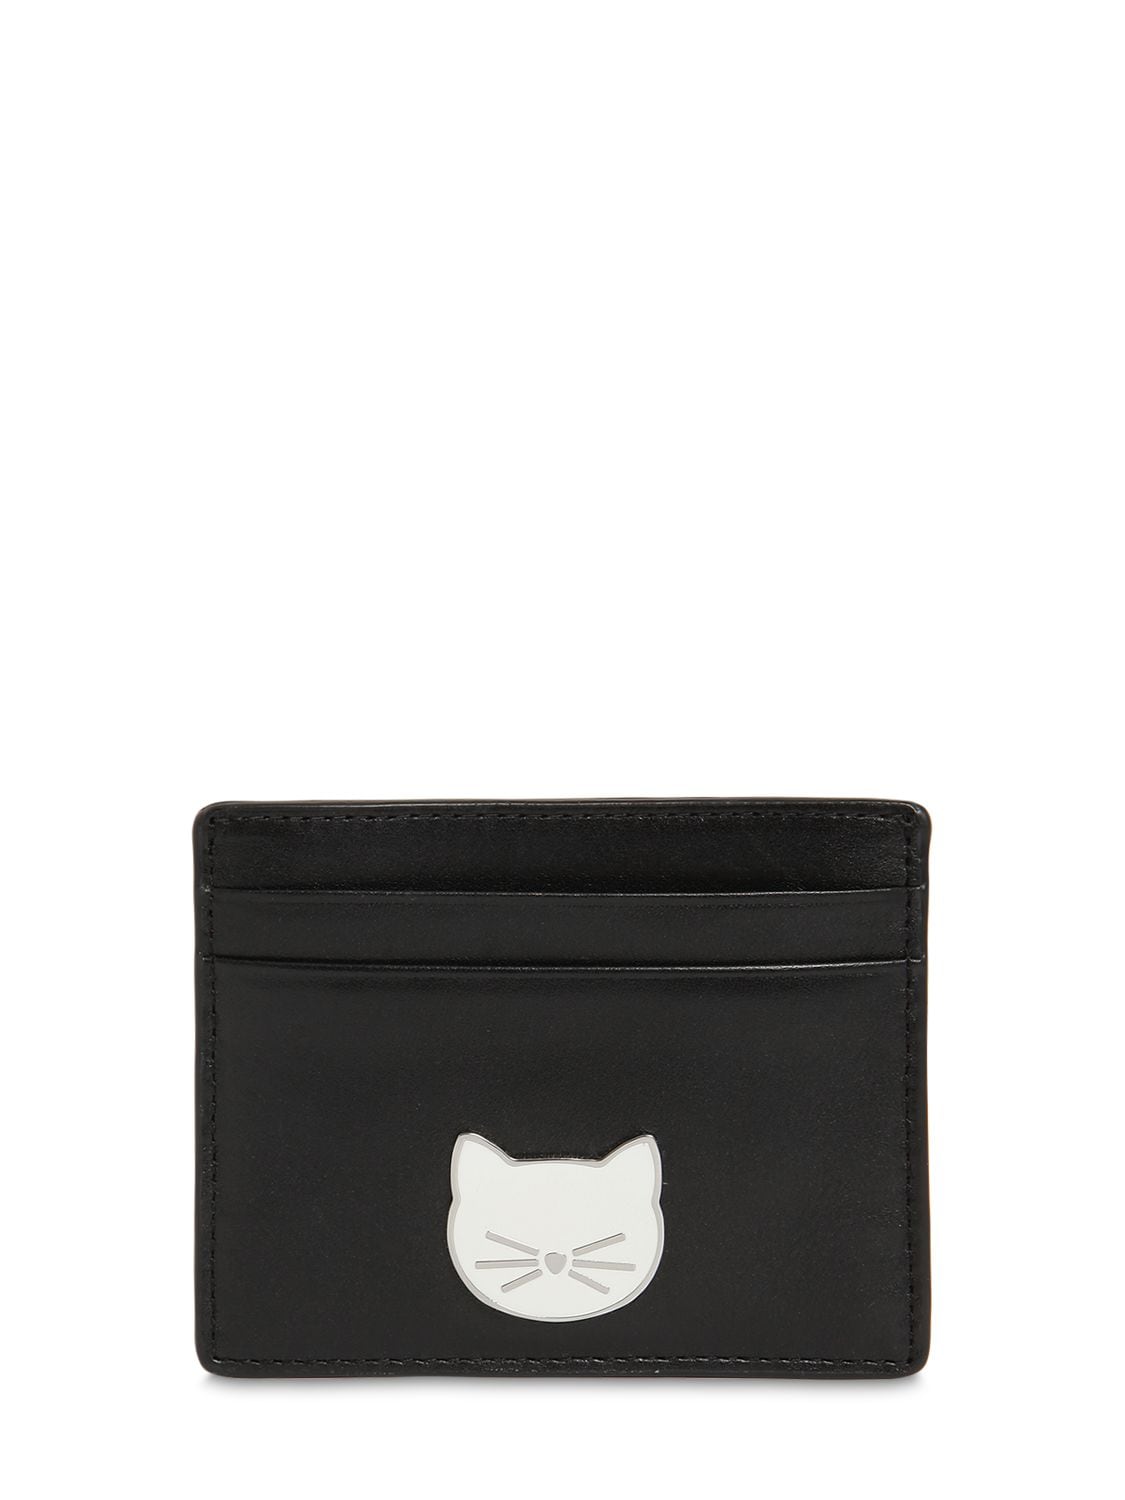 Karl Lagerfeld Choupette Patch Leather Card Holder In Black